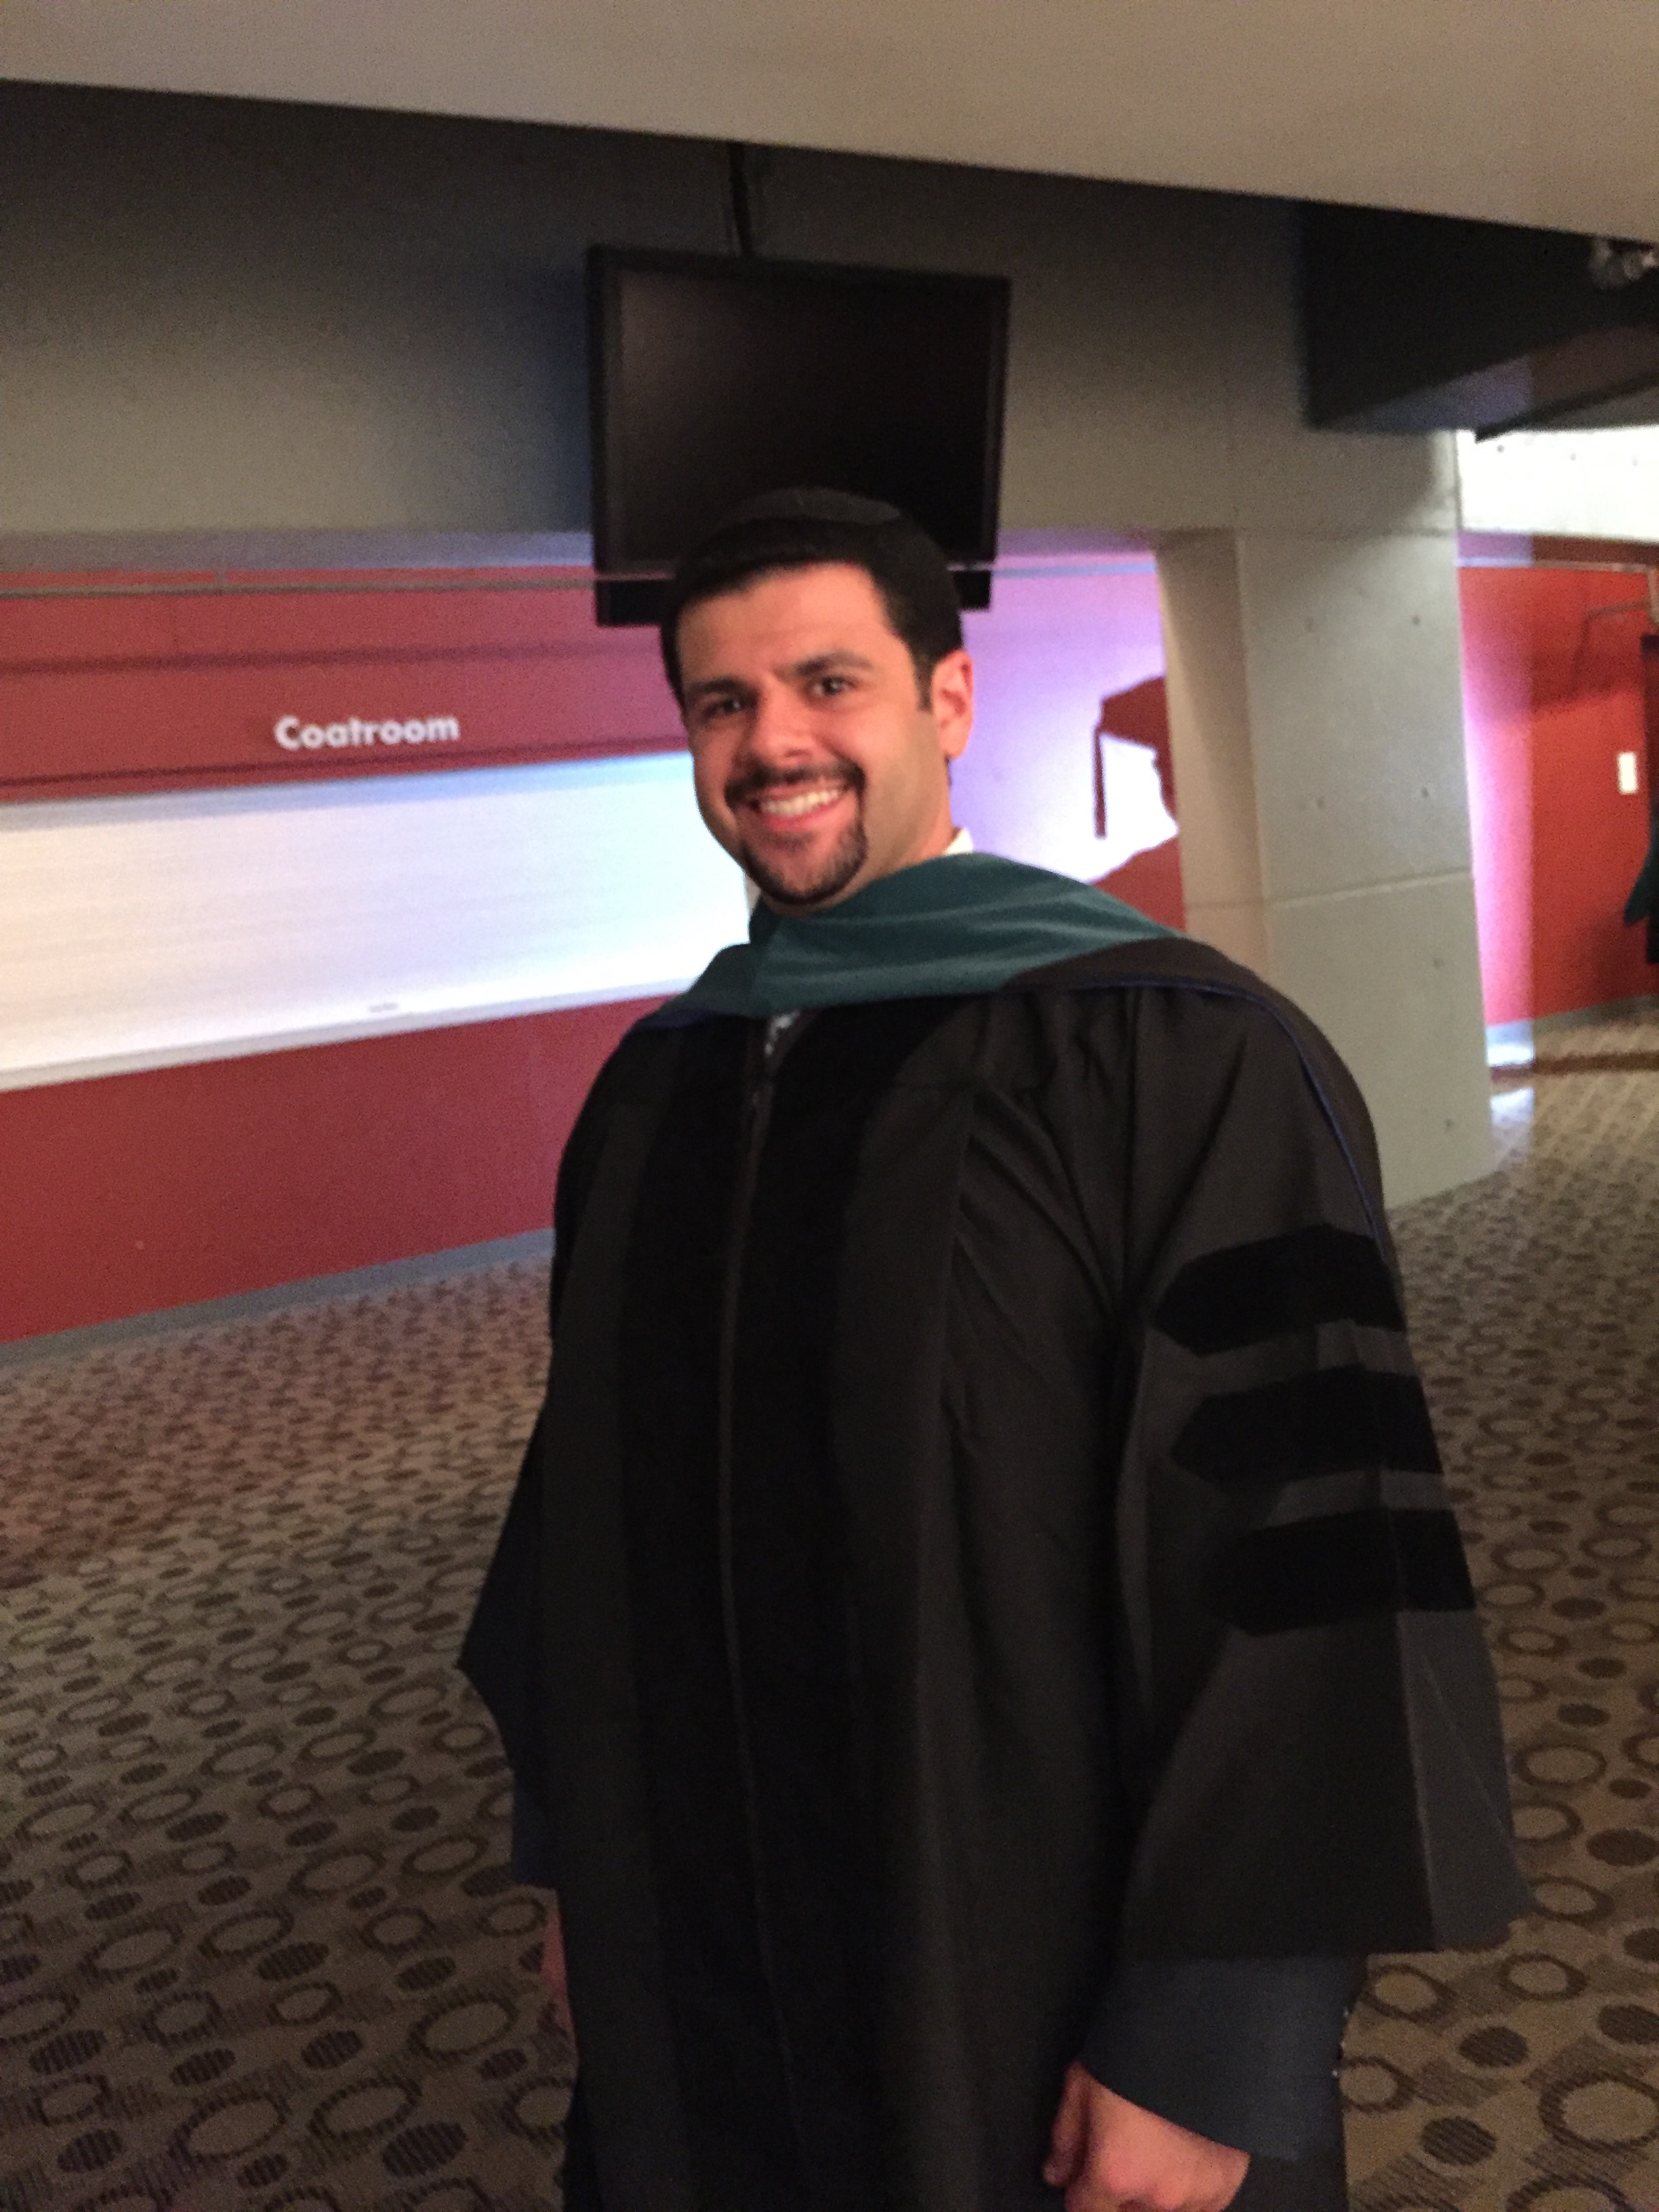 Daniel Friedman, class of 2016, graduate of the School of Health Sciences Doctor of Physical Therapy Program